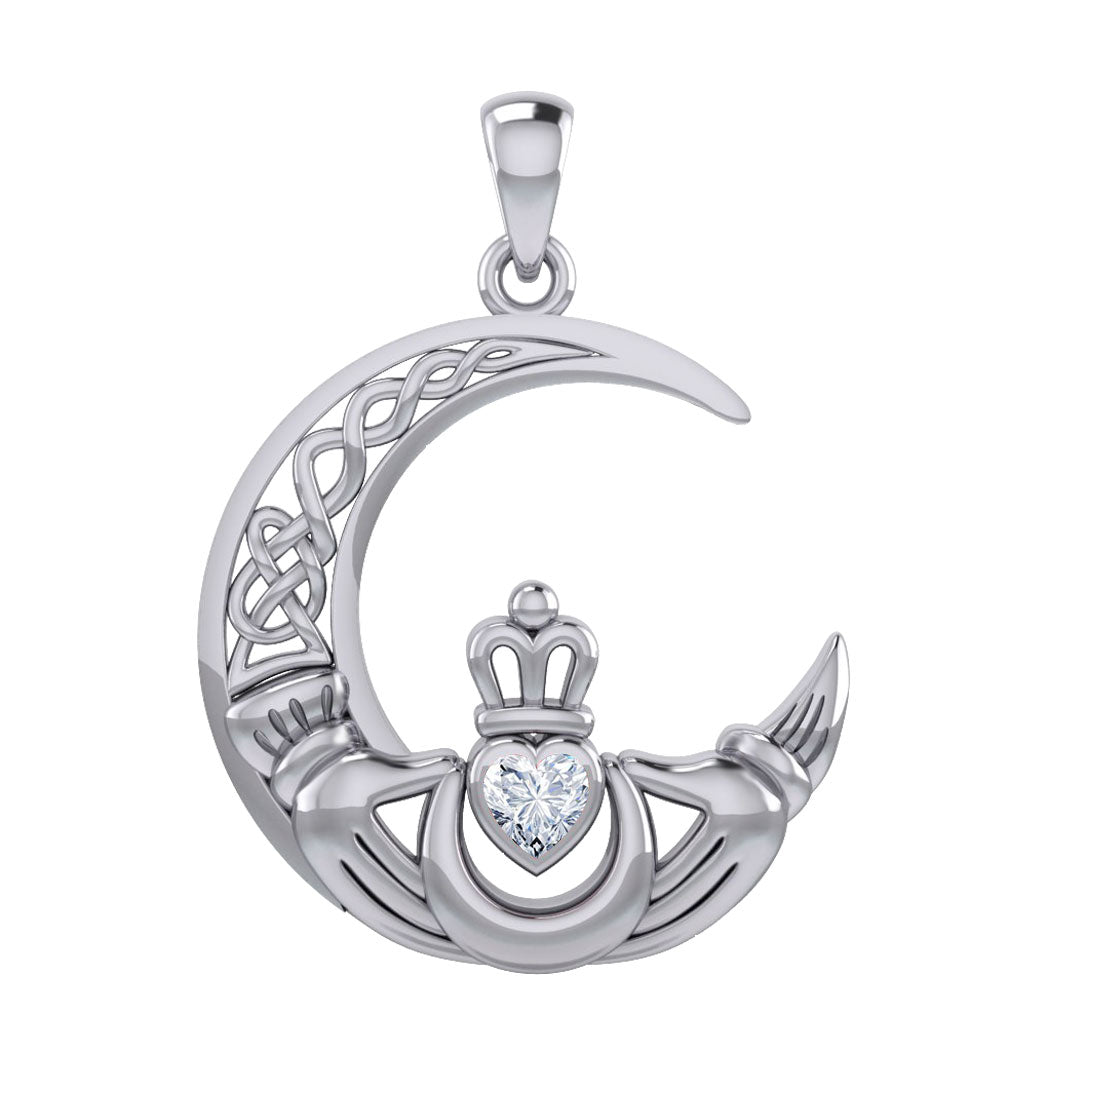 Peter Stone Celtic Crescent Moon Sterling Silver Pendant with  Genuine Gemstone Claddagh Design TPD6193